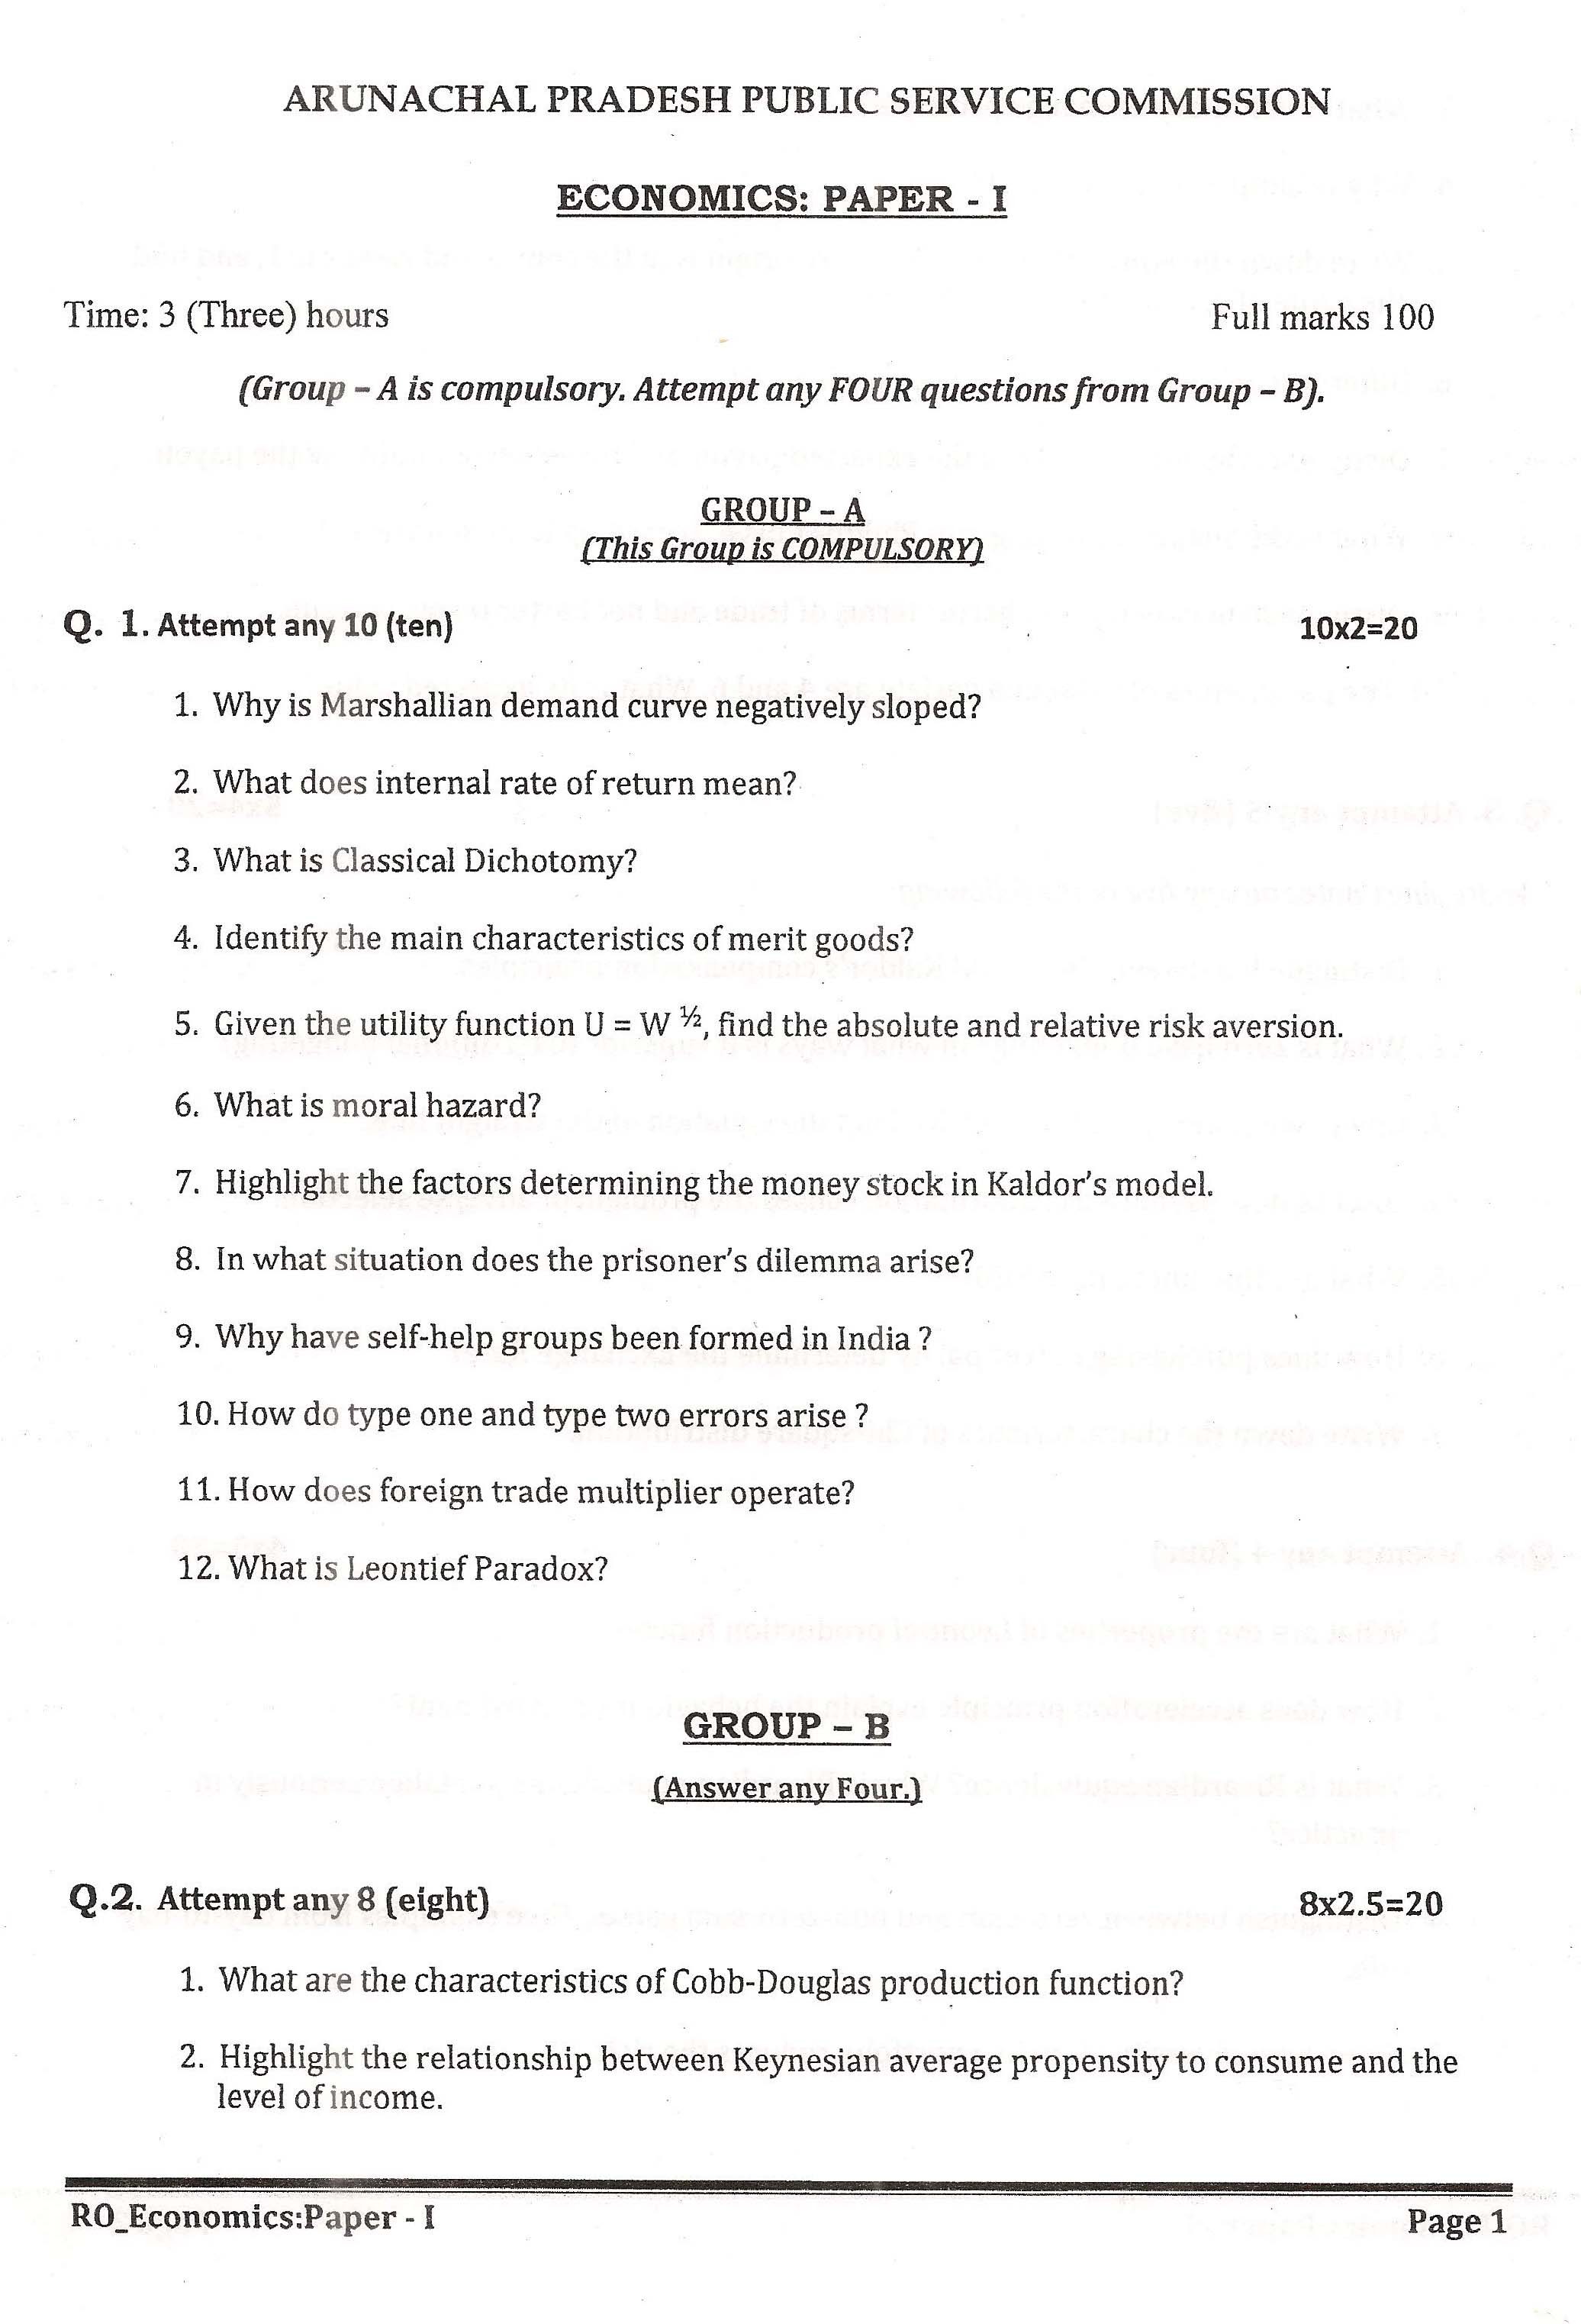 APPSC Research Officer Economics Paper I Exam Question Paper 2014 1